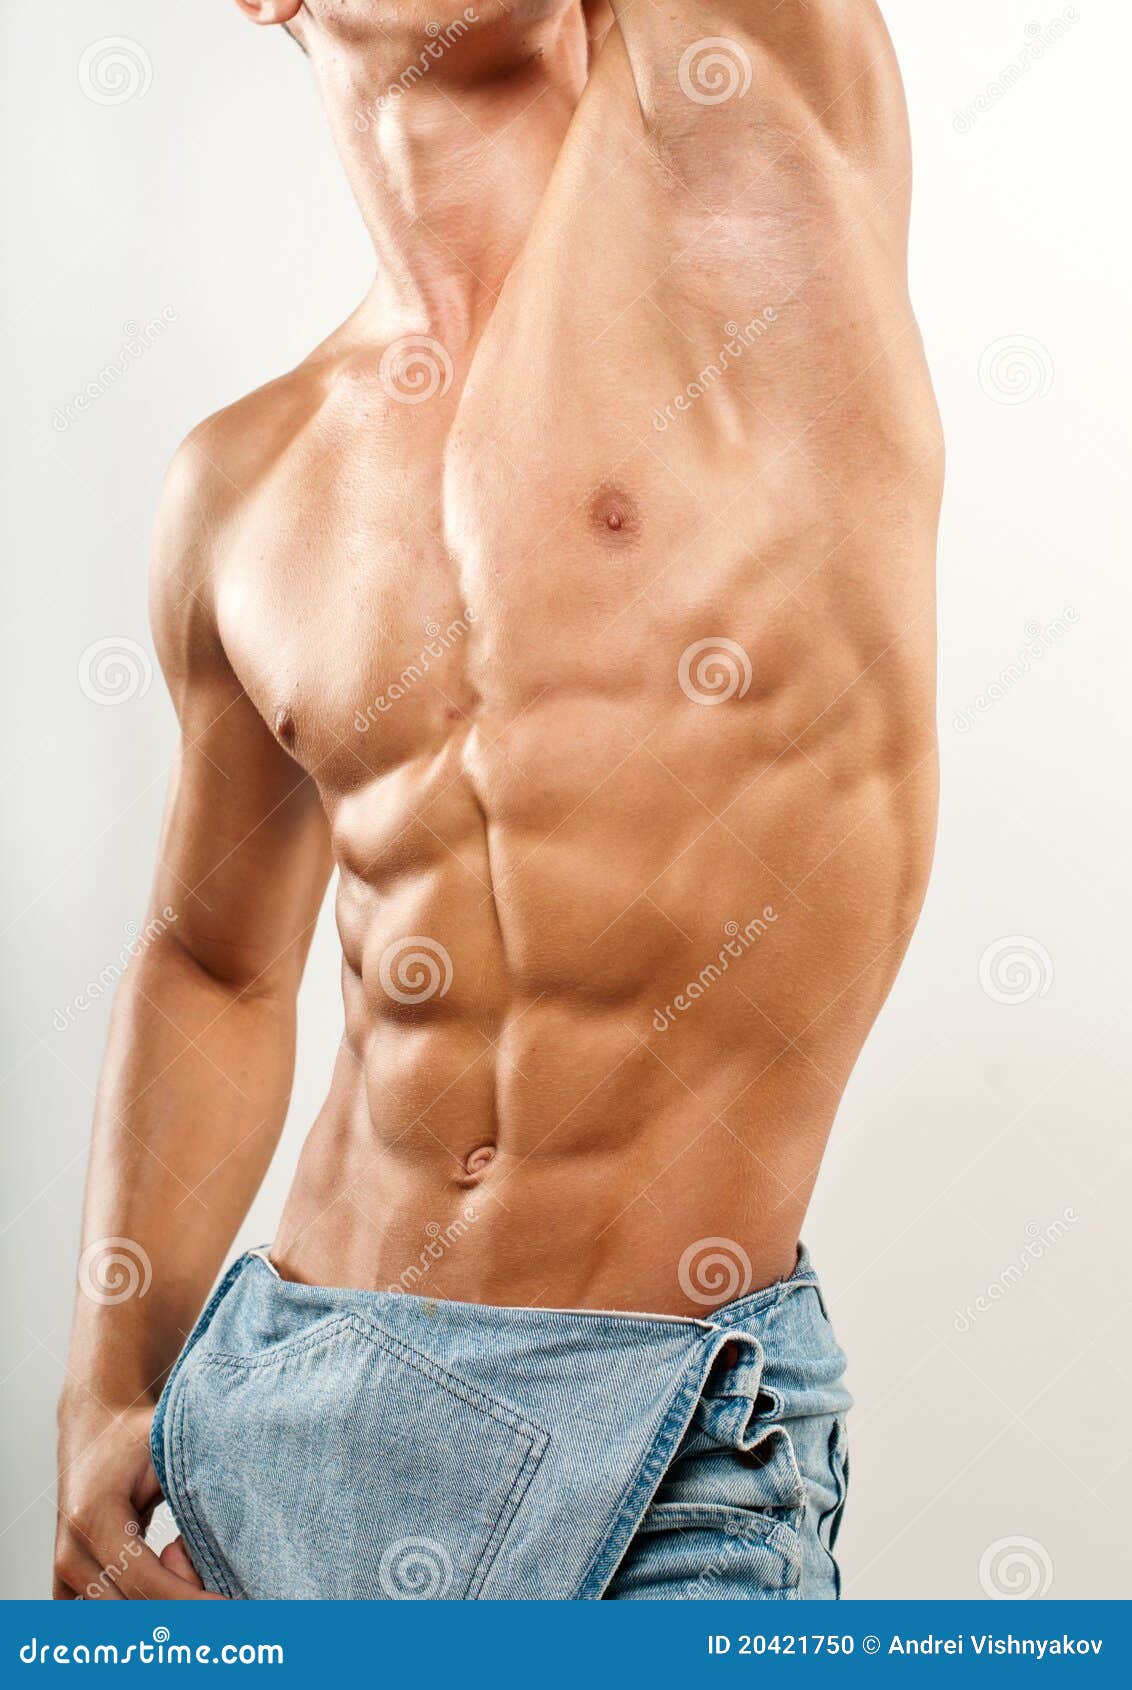 torso with six-pack